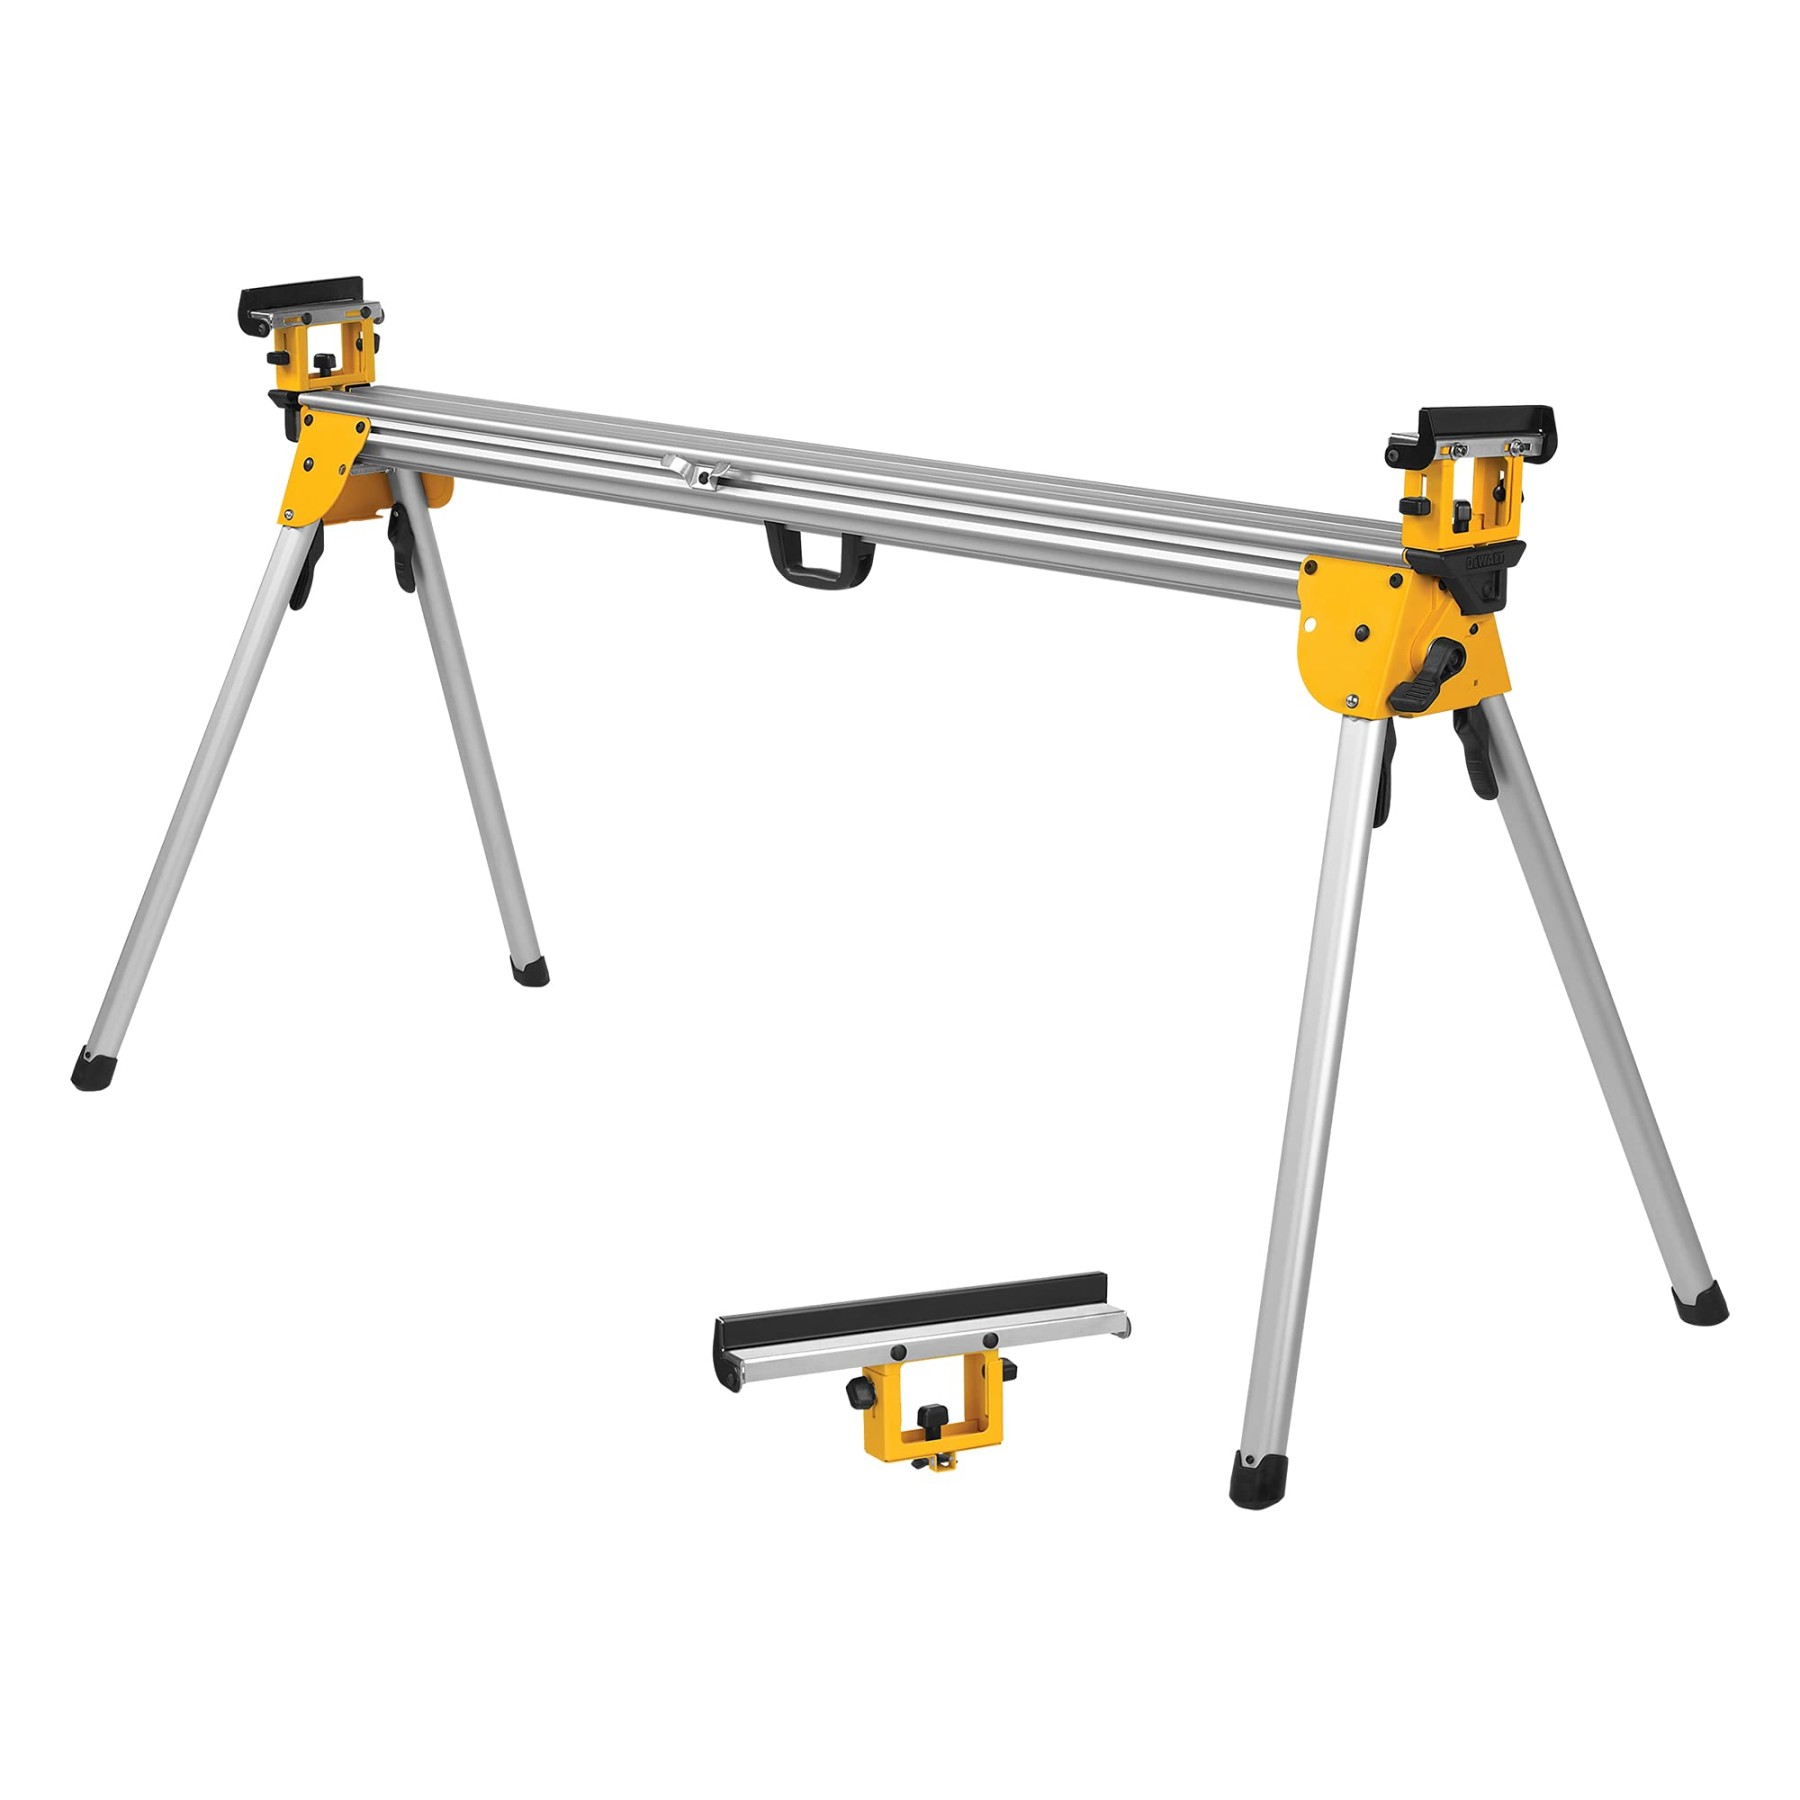 dewalt-miter-saw-stand-heavy-duty-dwx-amazon-ca-tools DeWalt Miter Saw Stand Review: Rock Solid Or Overkill For Your Needs? picture